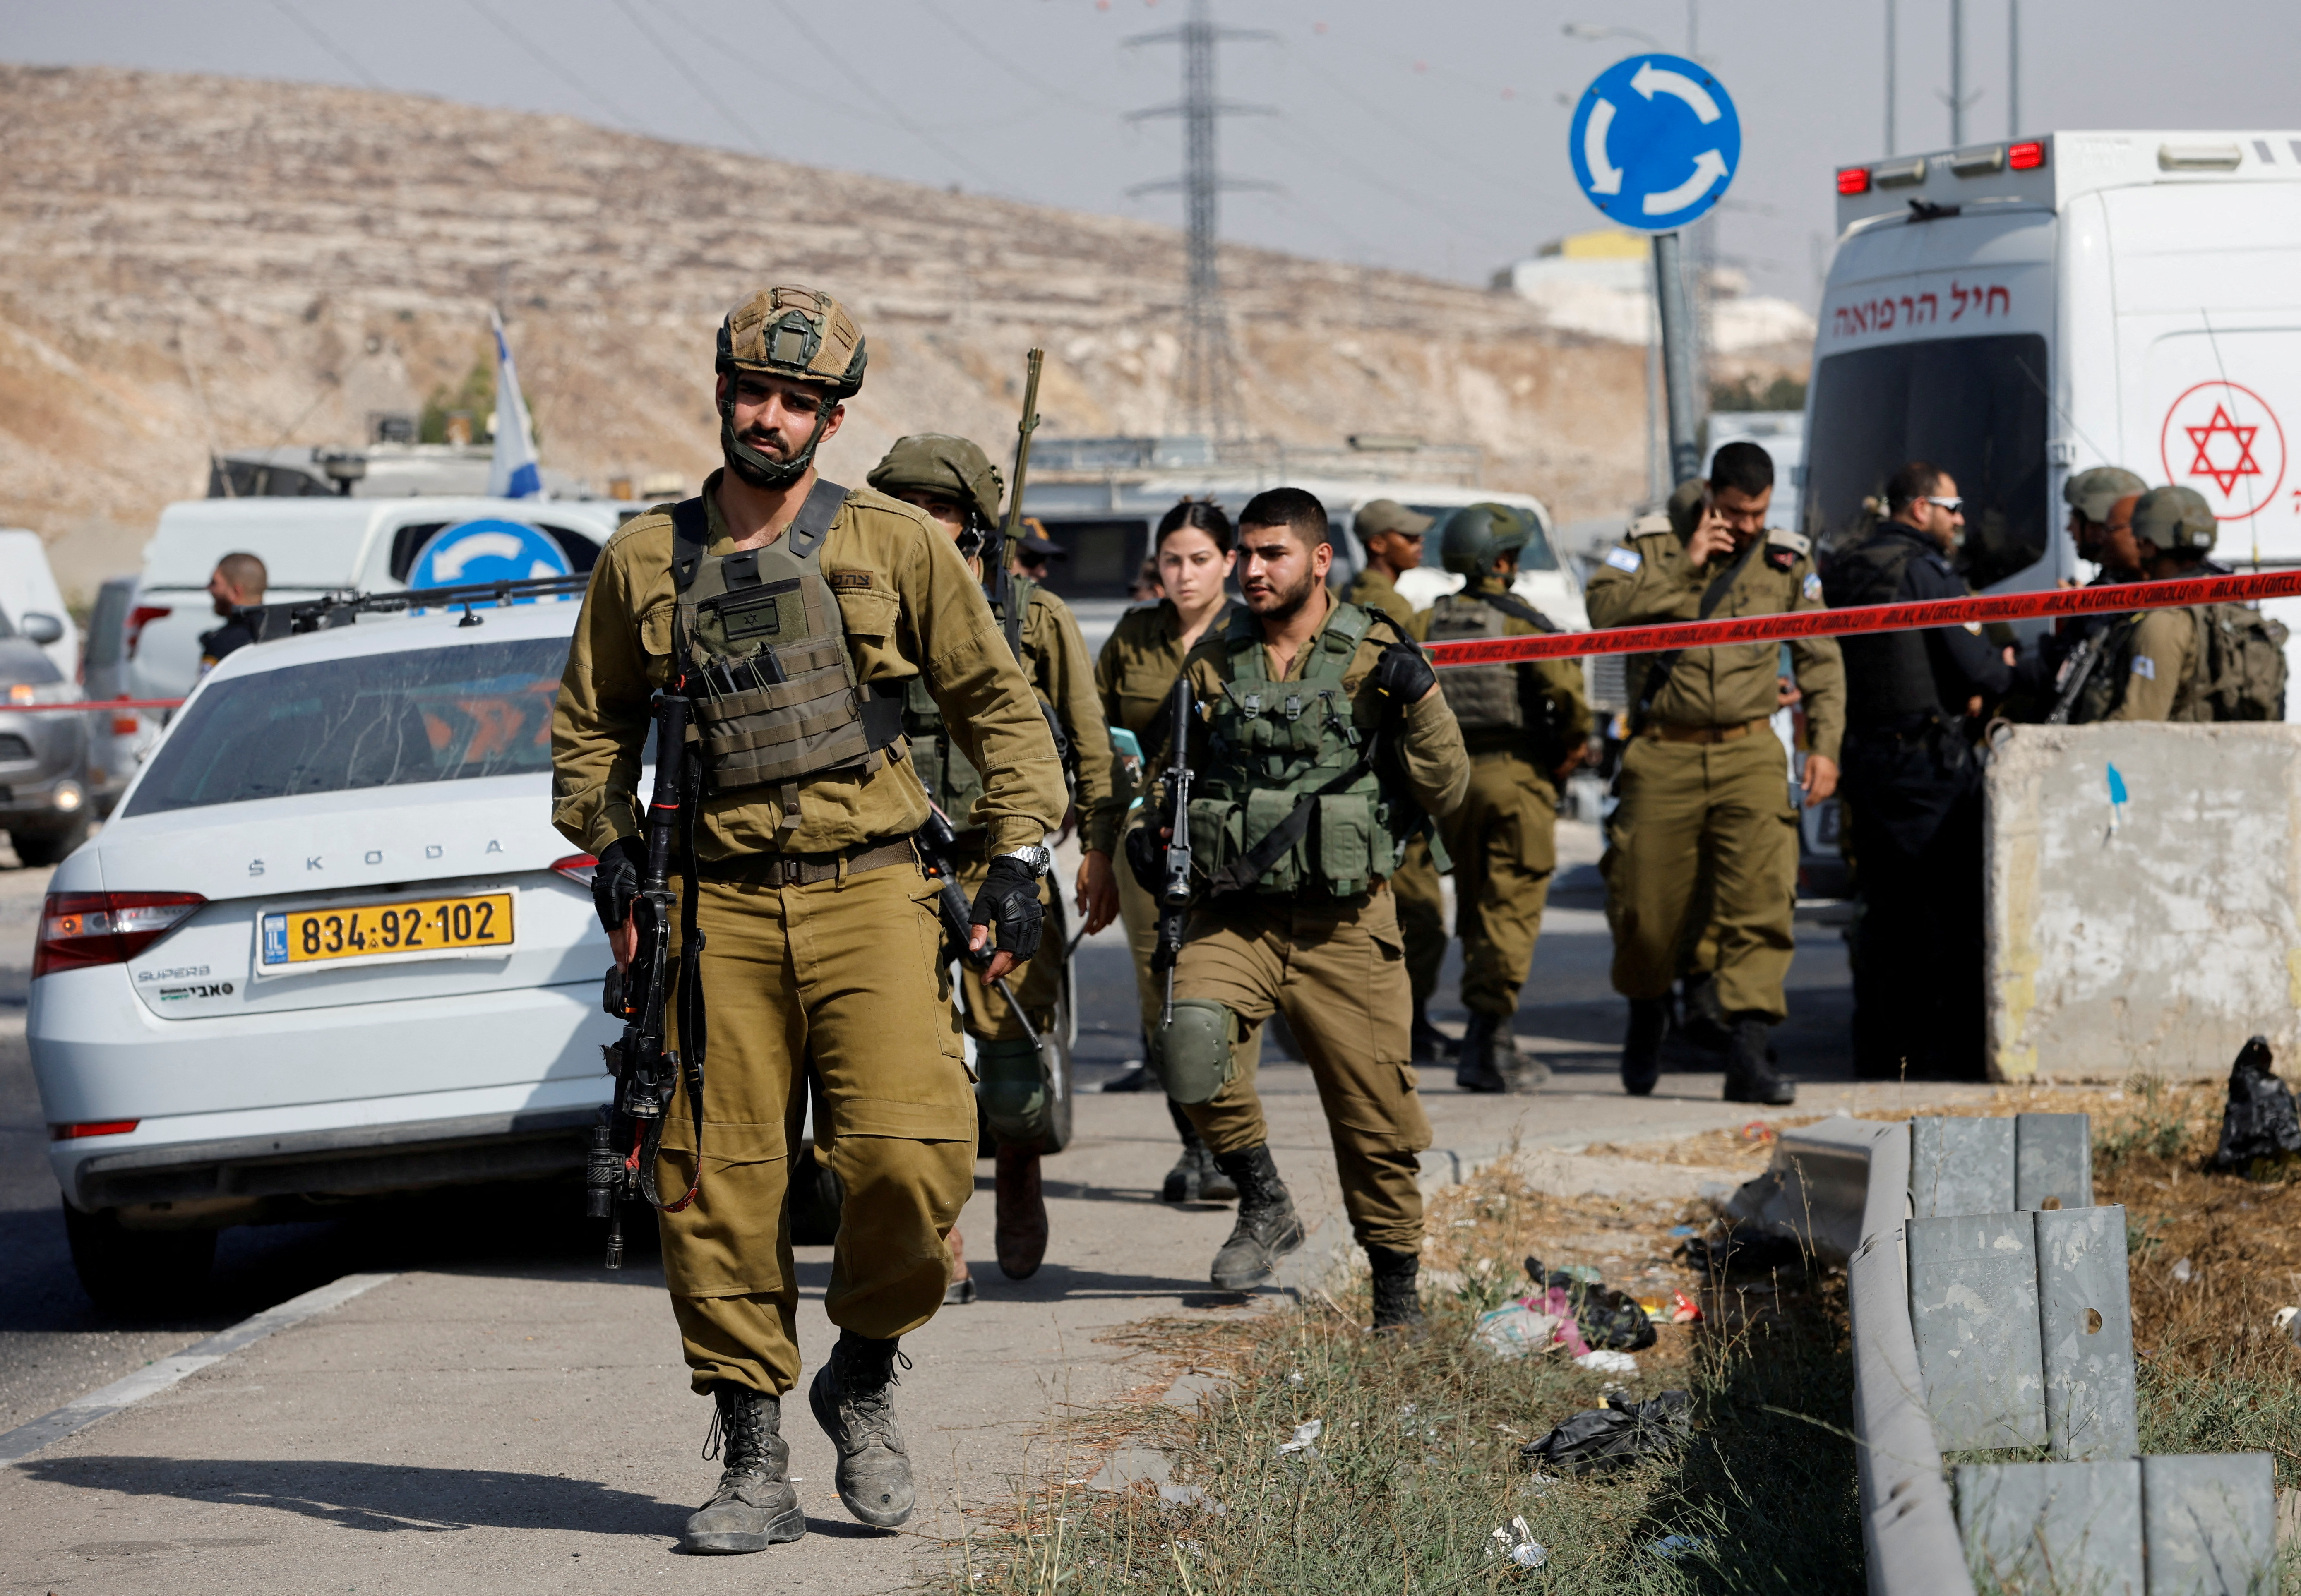 Israeli troops stands guard at a scene of stabbing incident near Hebron